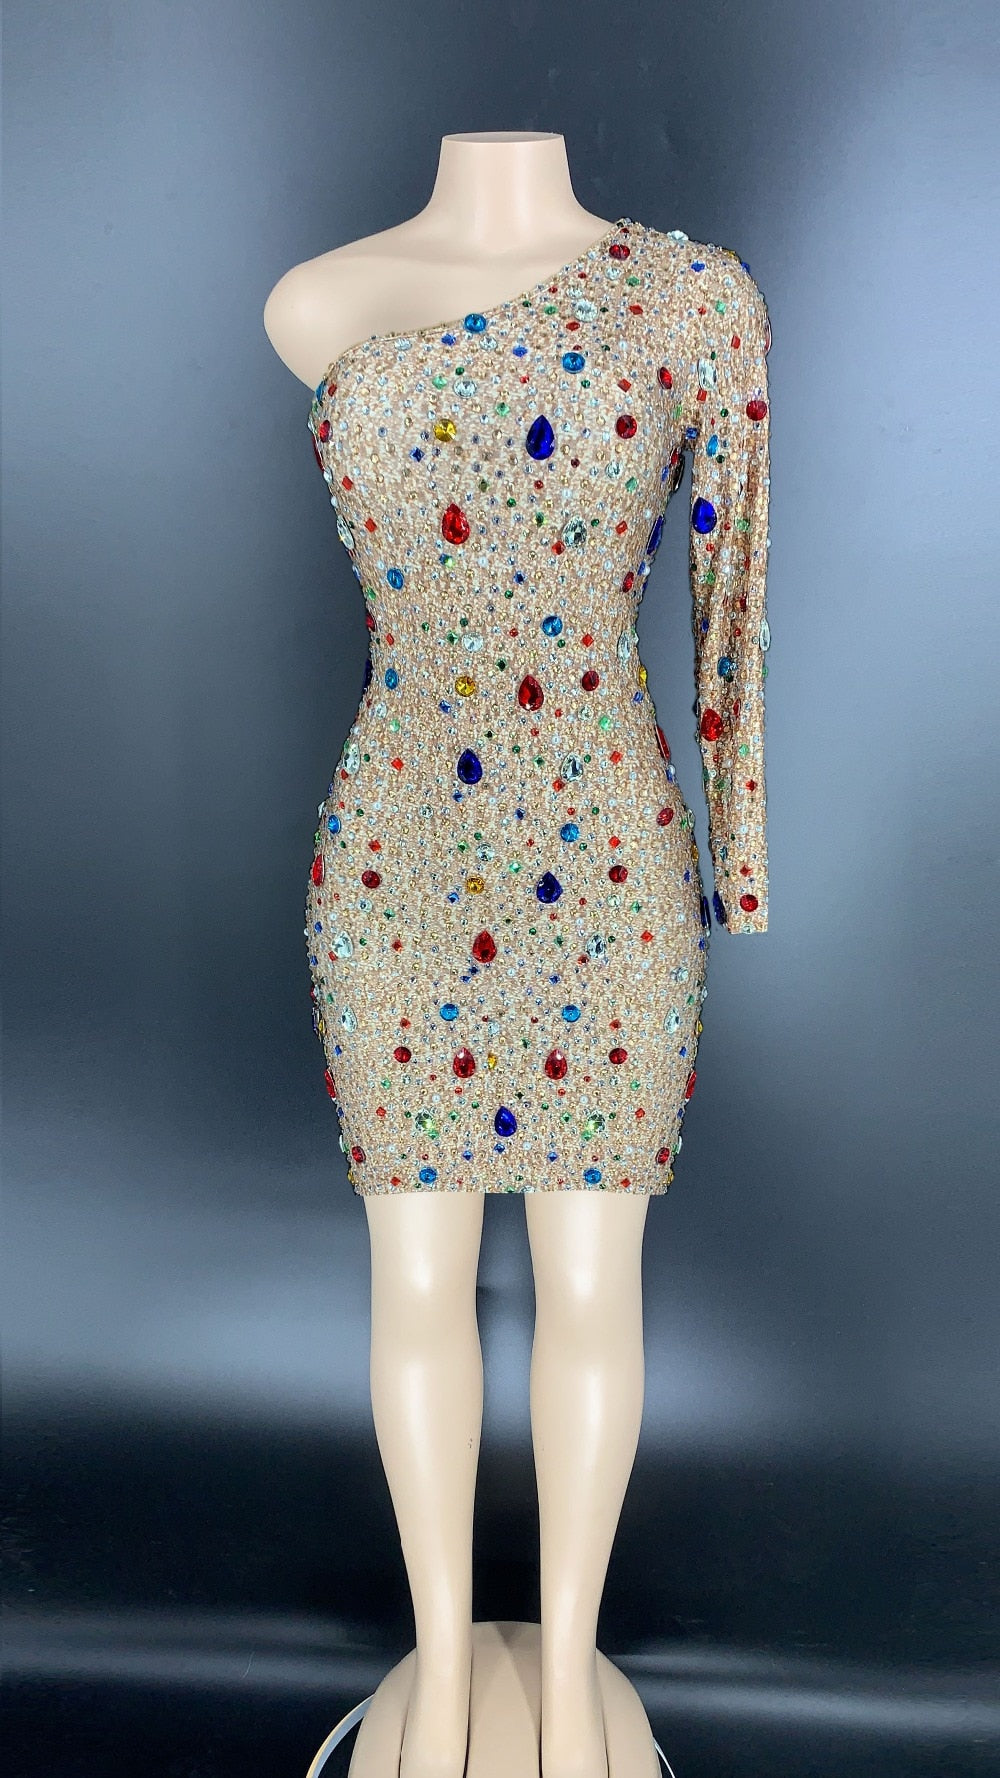 Sparkly Multi-color Glass Rhinestones Long Dress Women's Birthday Celebrate Outfit One Sleeve Dancer